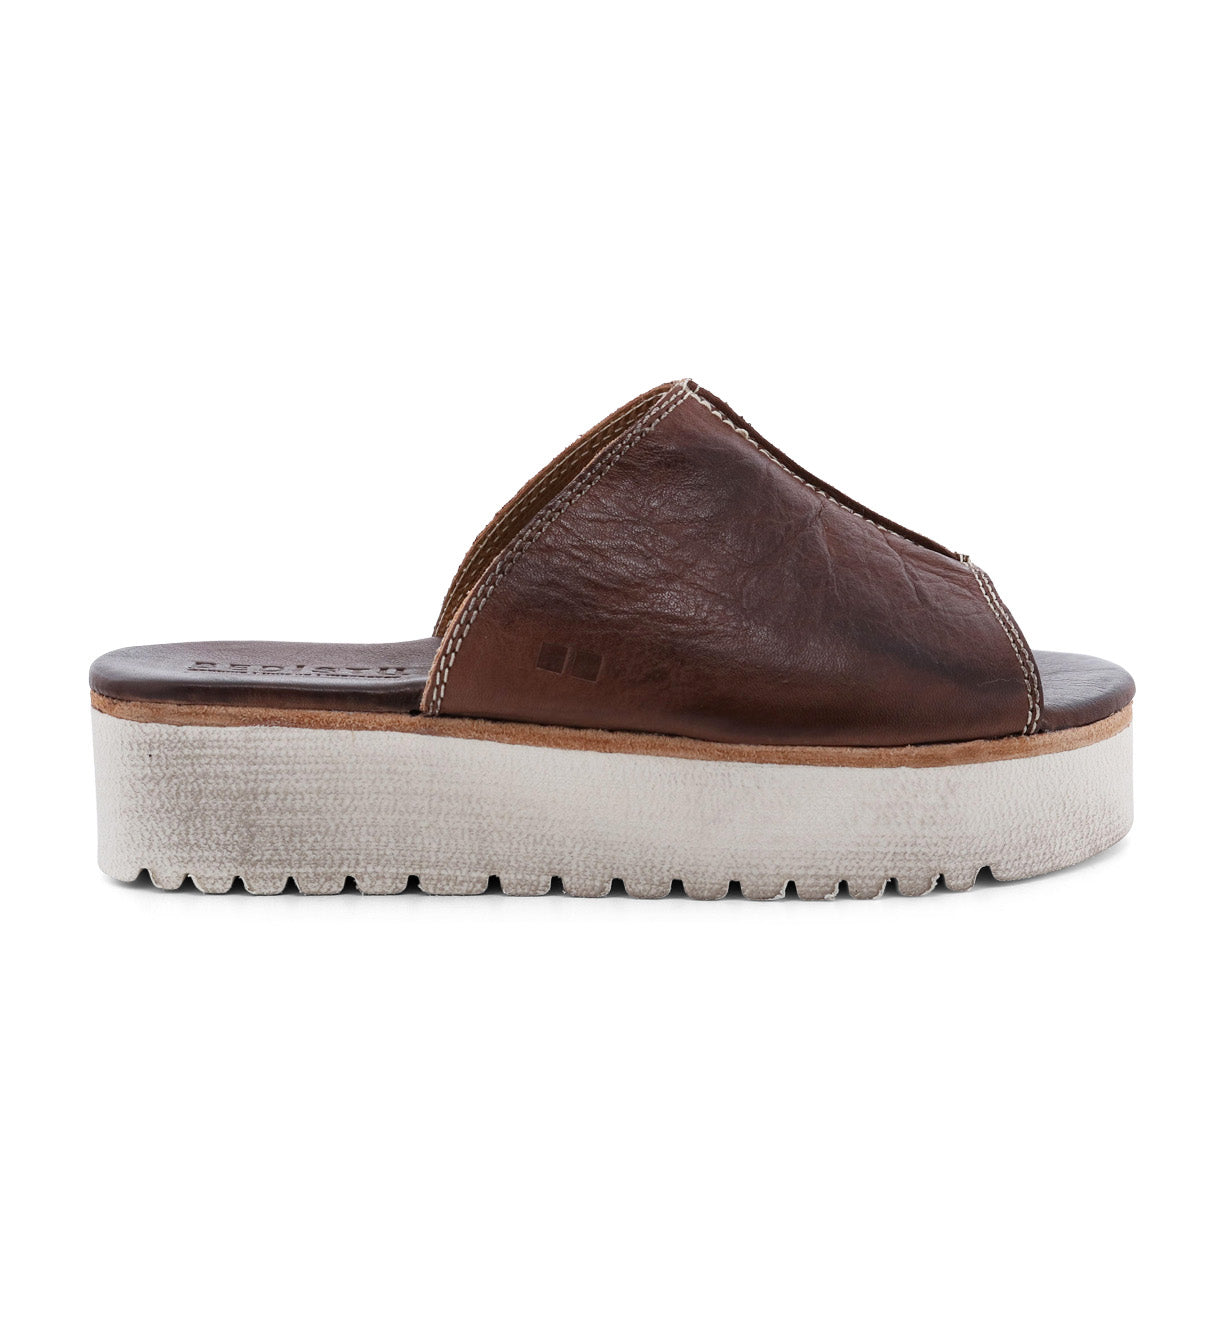 A women's Fairlee II brown leather slide sandal with a white sole, from the brand Bed Stu.